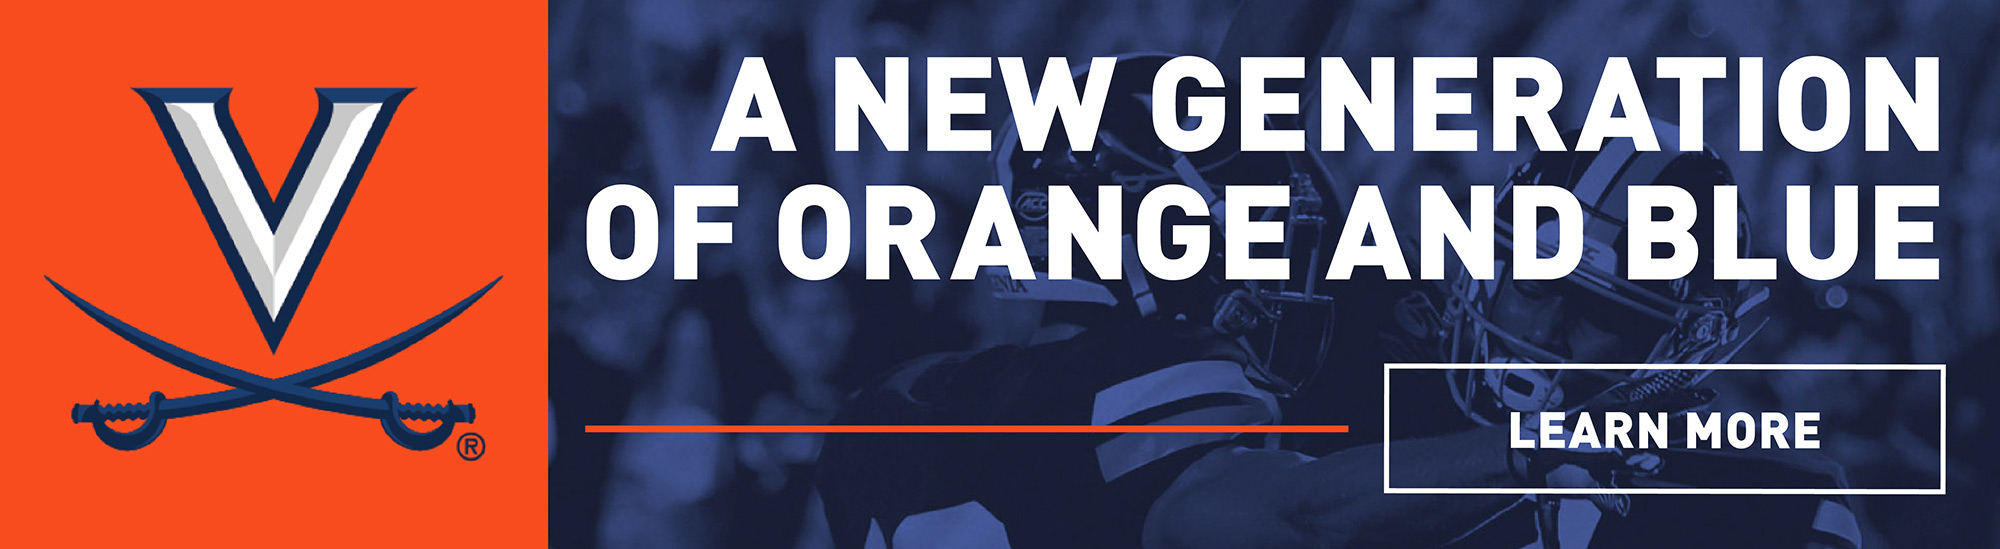 A new generation of orange and blue. Learn more.